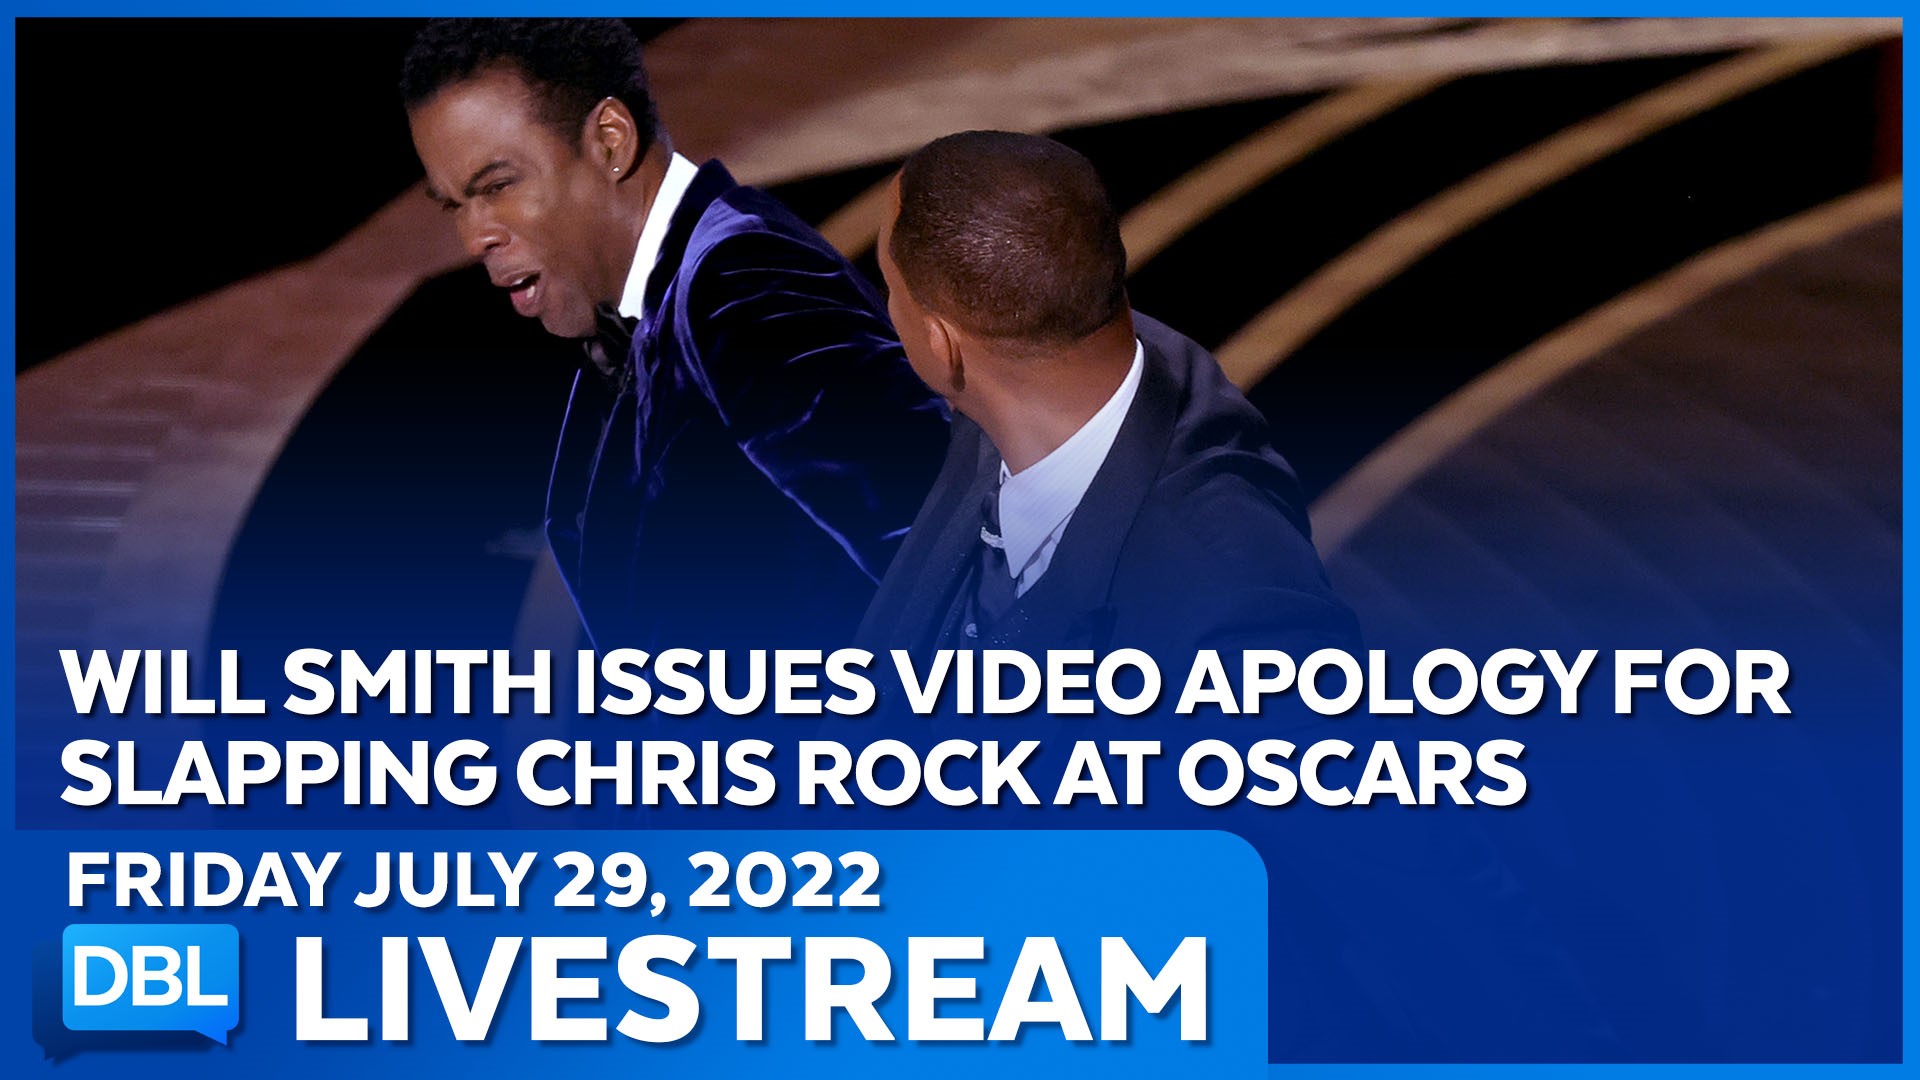 Will Smith apologizes to Chris Rock; 'Canceled' stars land jobs; Beyoncé accused of sampling track without permission.